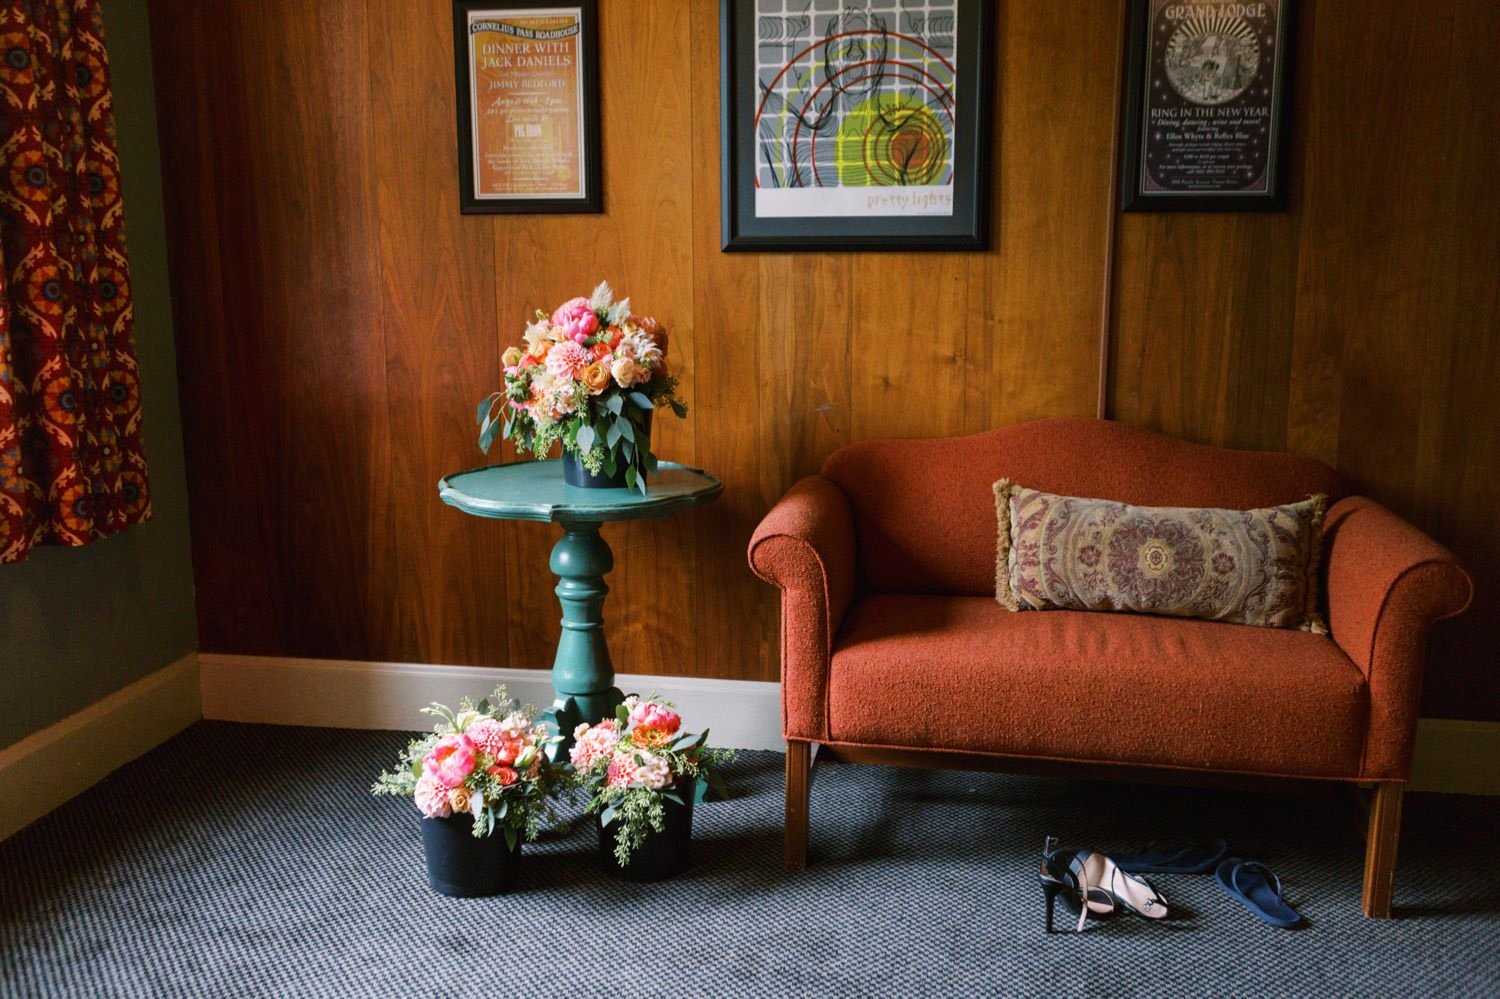  bouquets of flowers sit on green table next to orange couch 